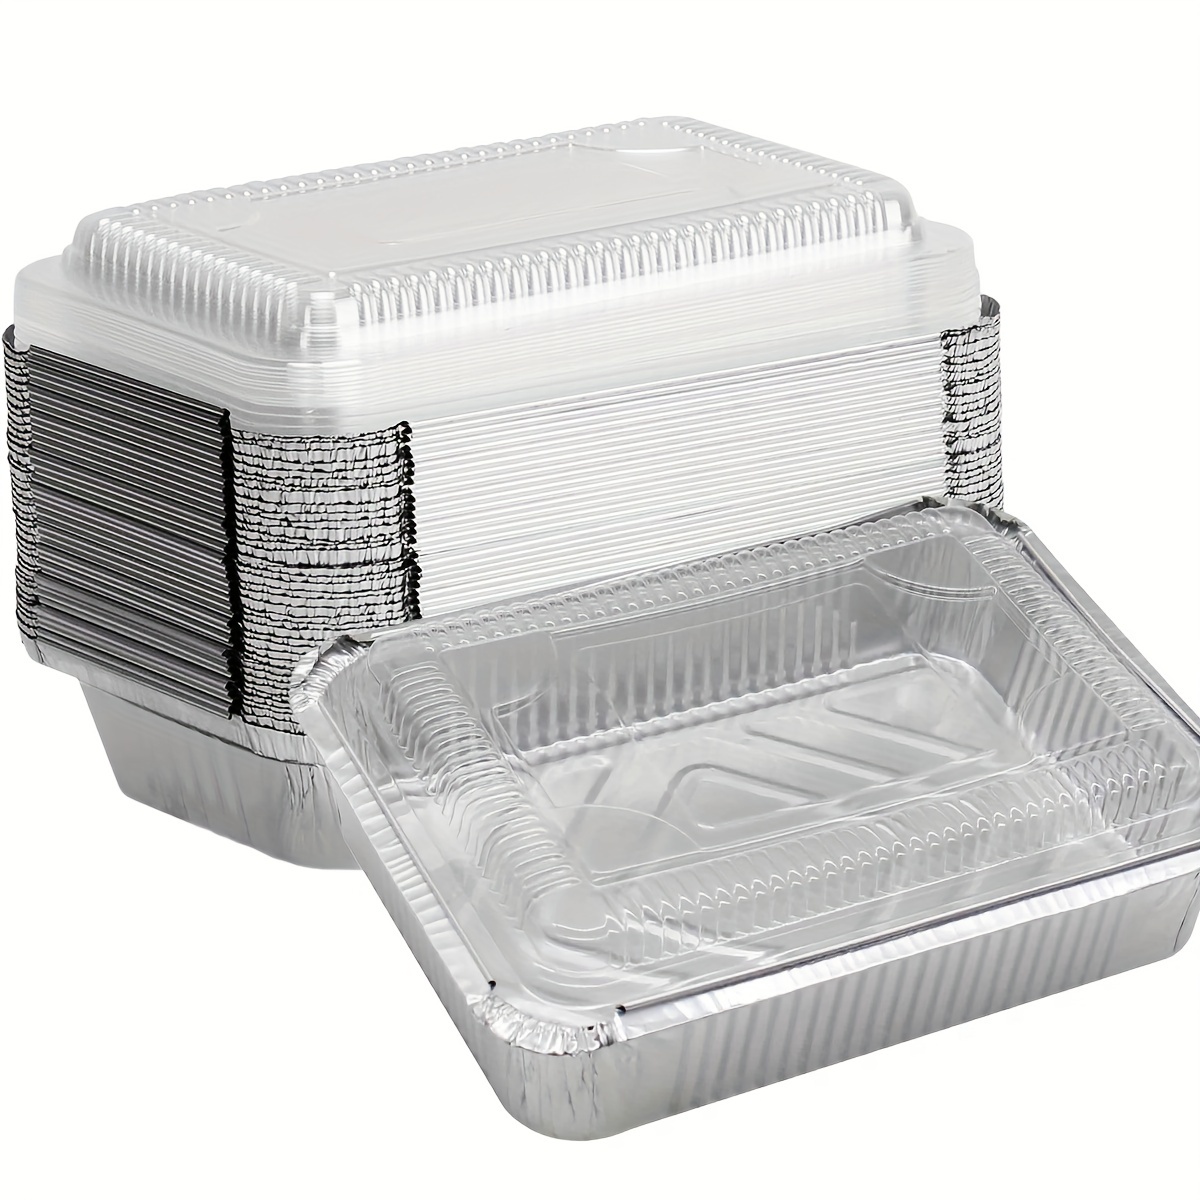 Aluminum Pans Take Out Containers with Lids (50 Pack) 2 Lb Disposable  Aluminum Foil Oblong Pans with Cardboard Covers - To Go Food Storage  Containers